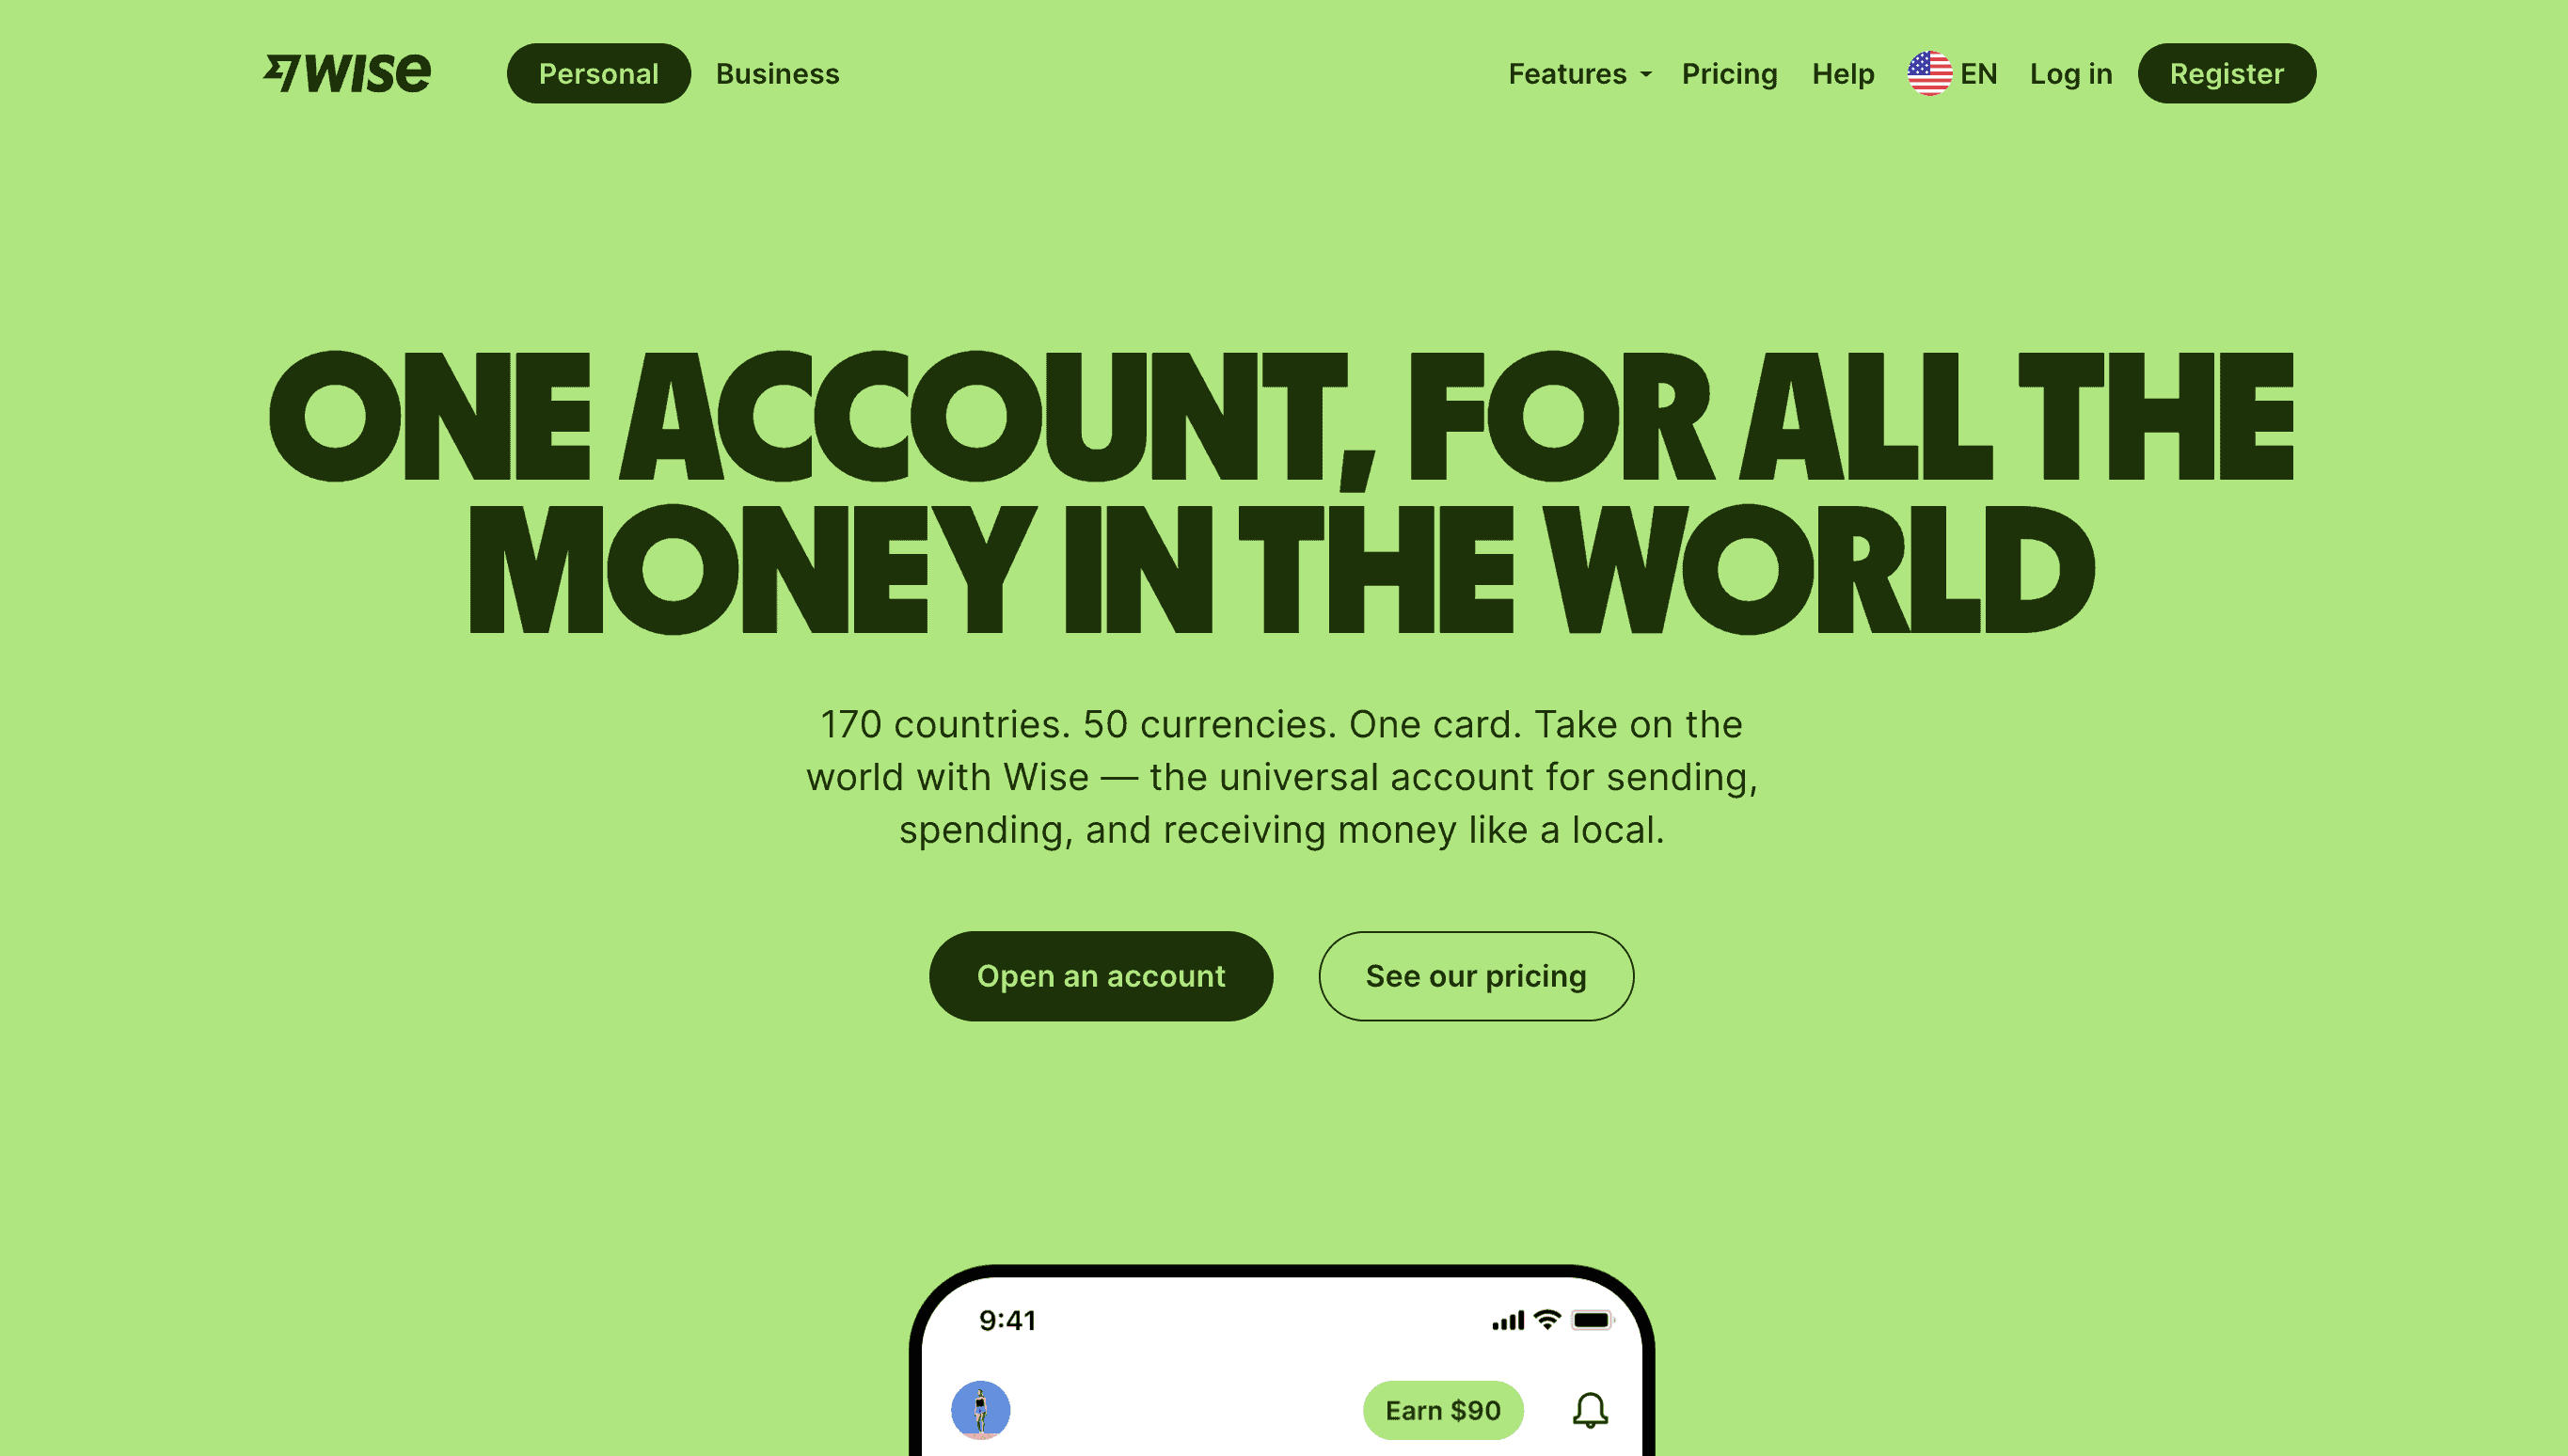 The homepage of Wise, the bank for digital nomads